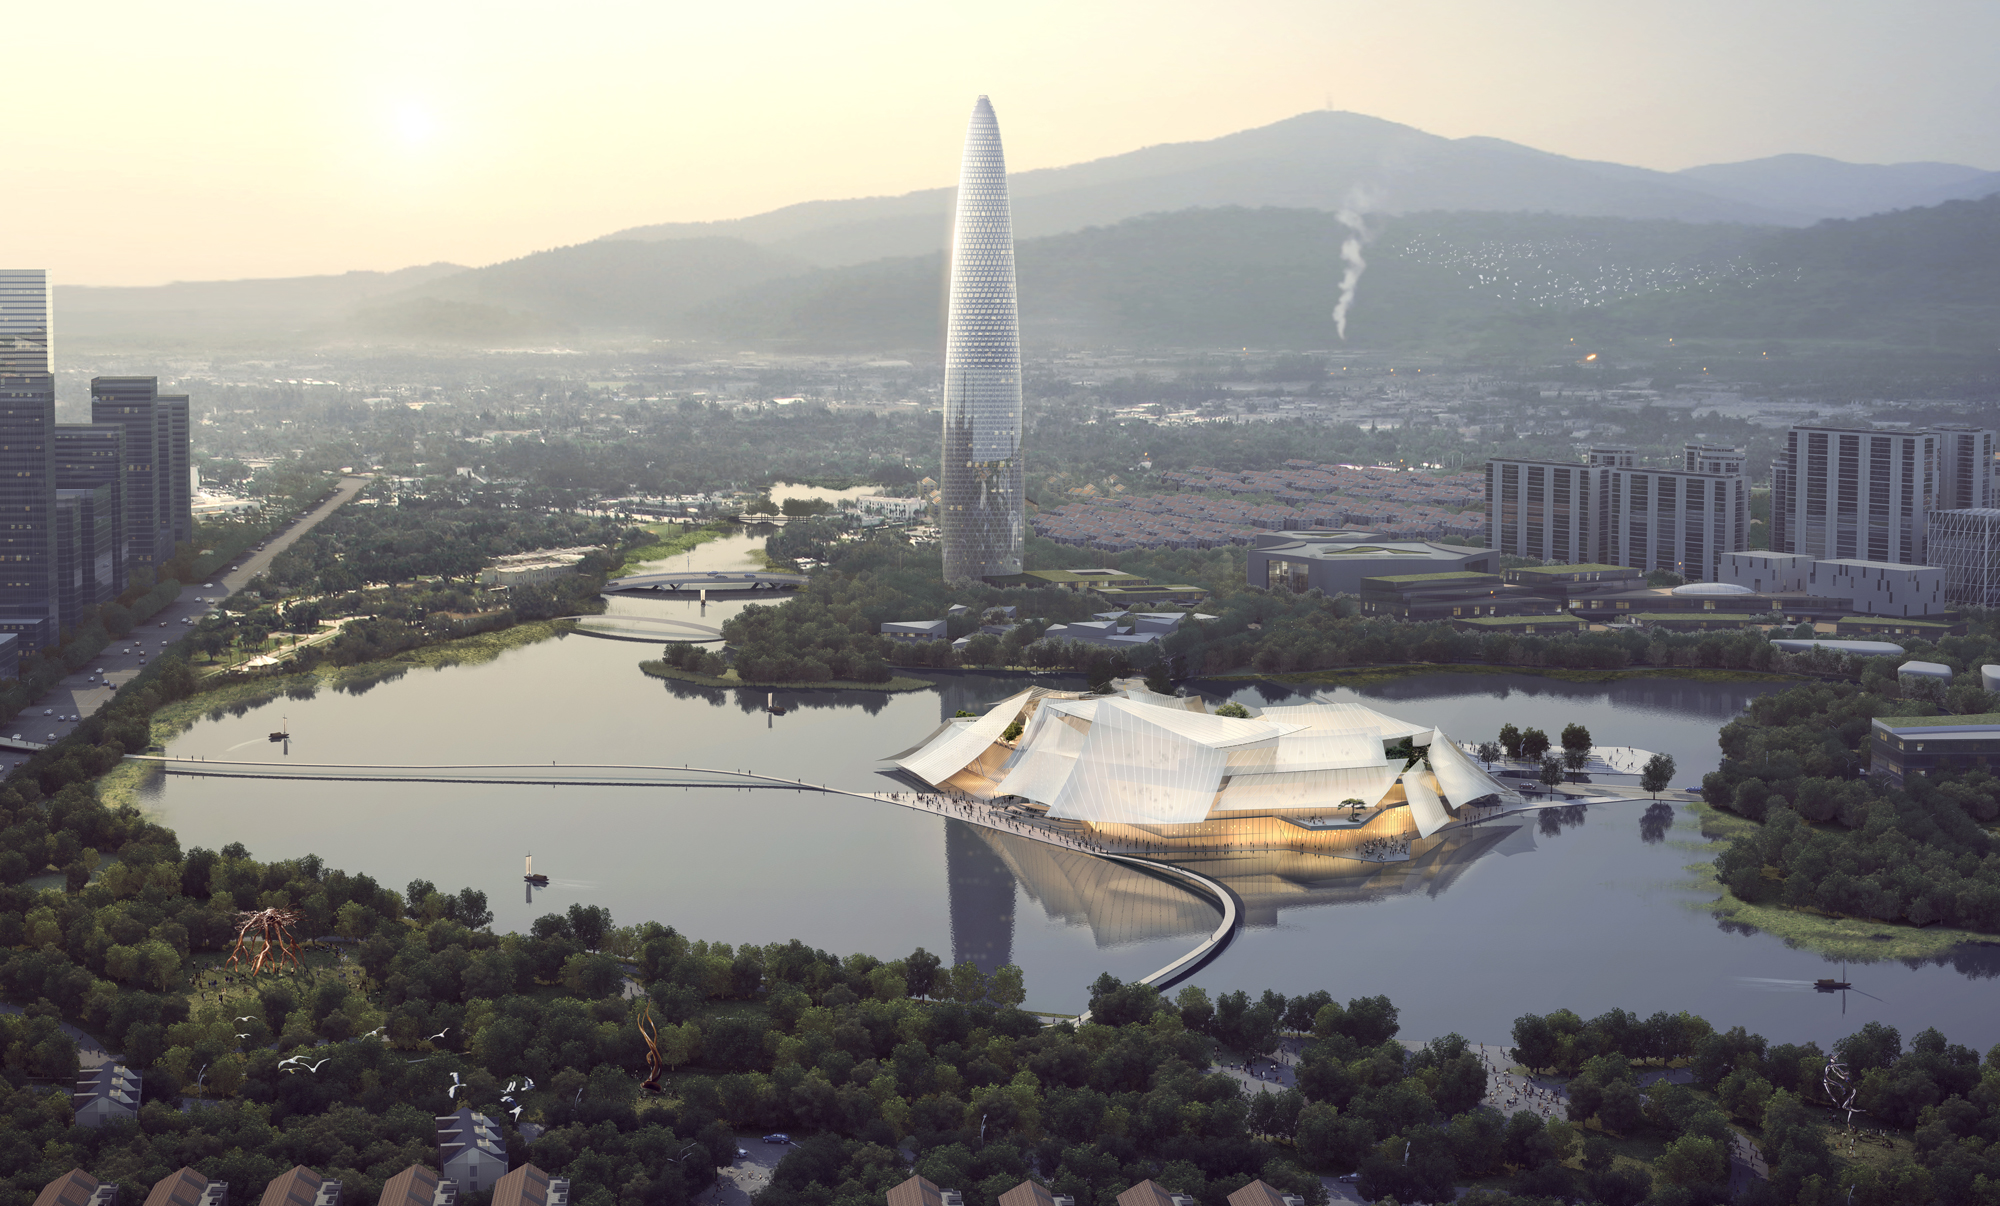 Rendering for Yiwu Grand Theatre, by MAD